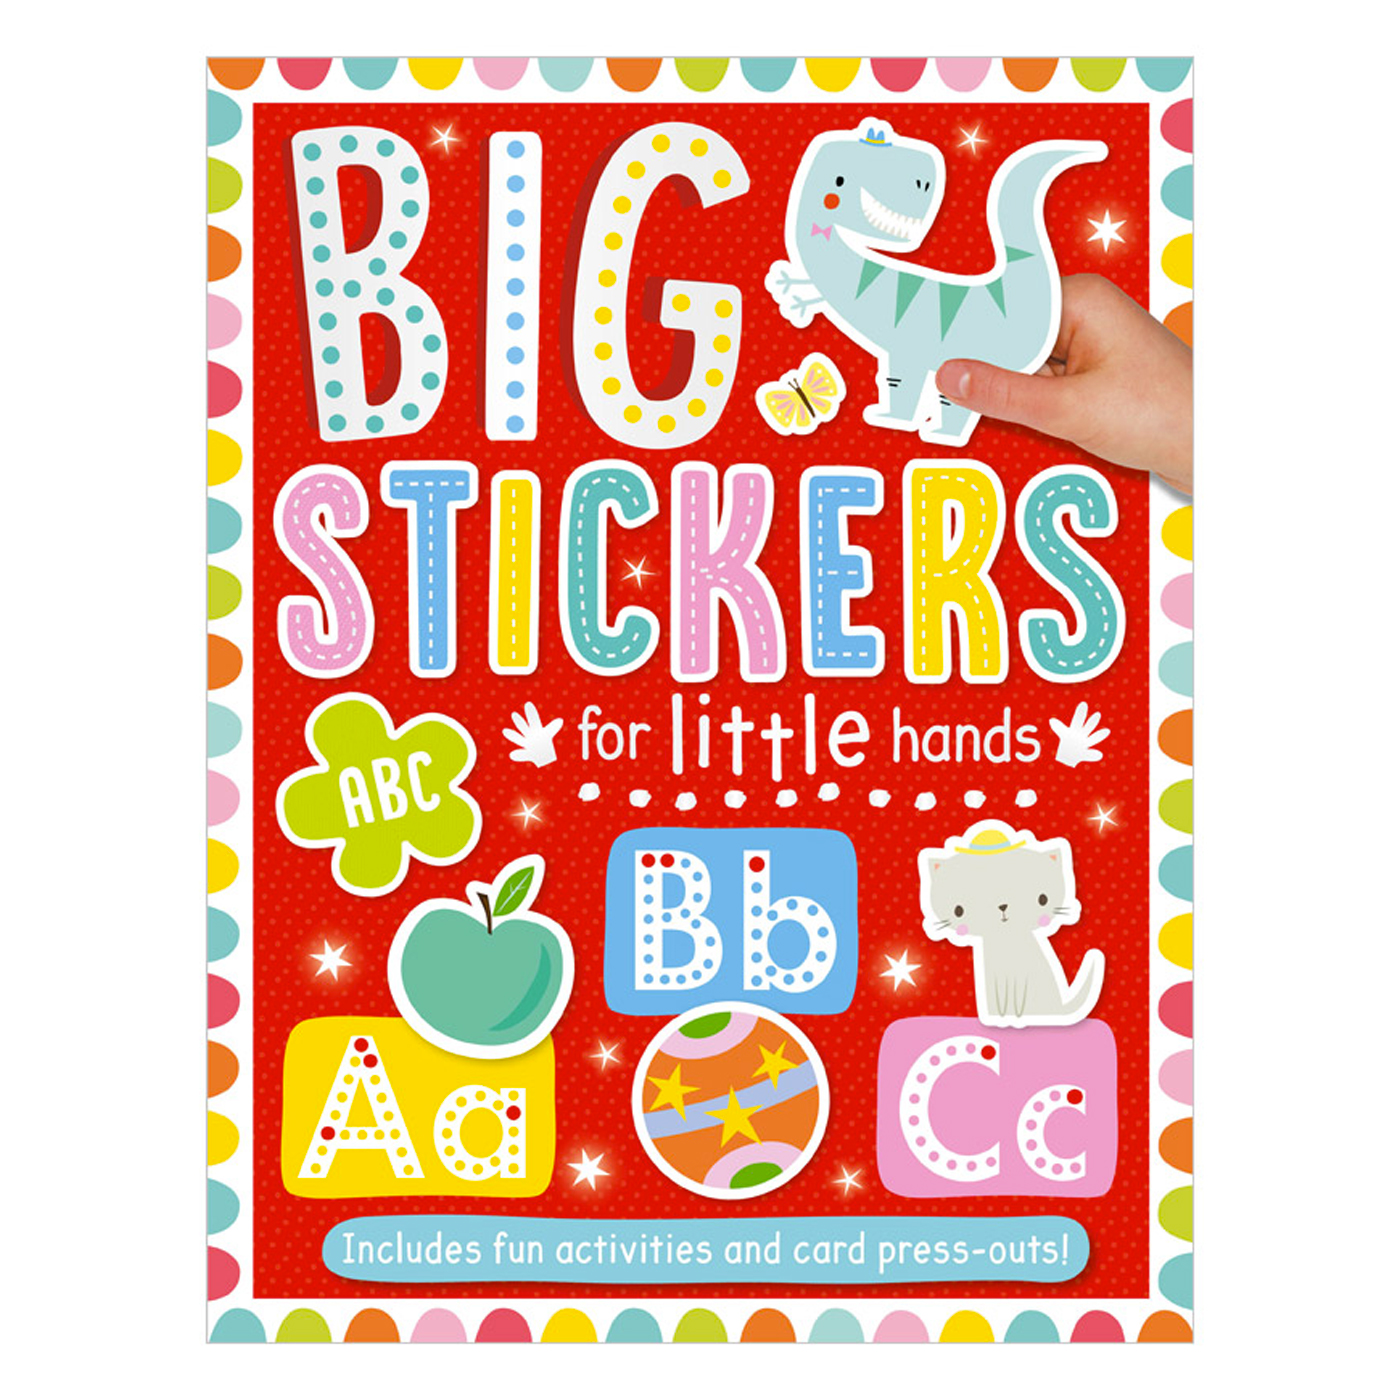  Big Stickers for Little Hands ABC